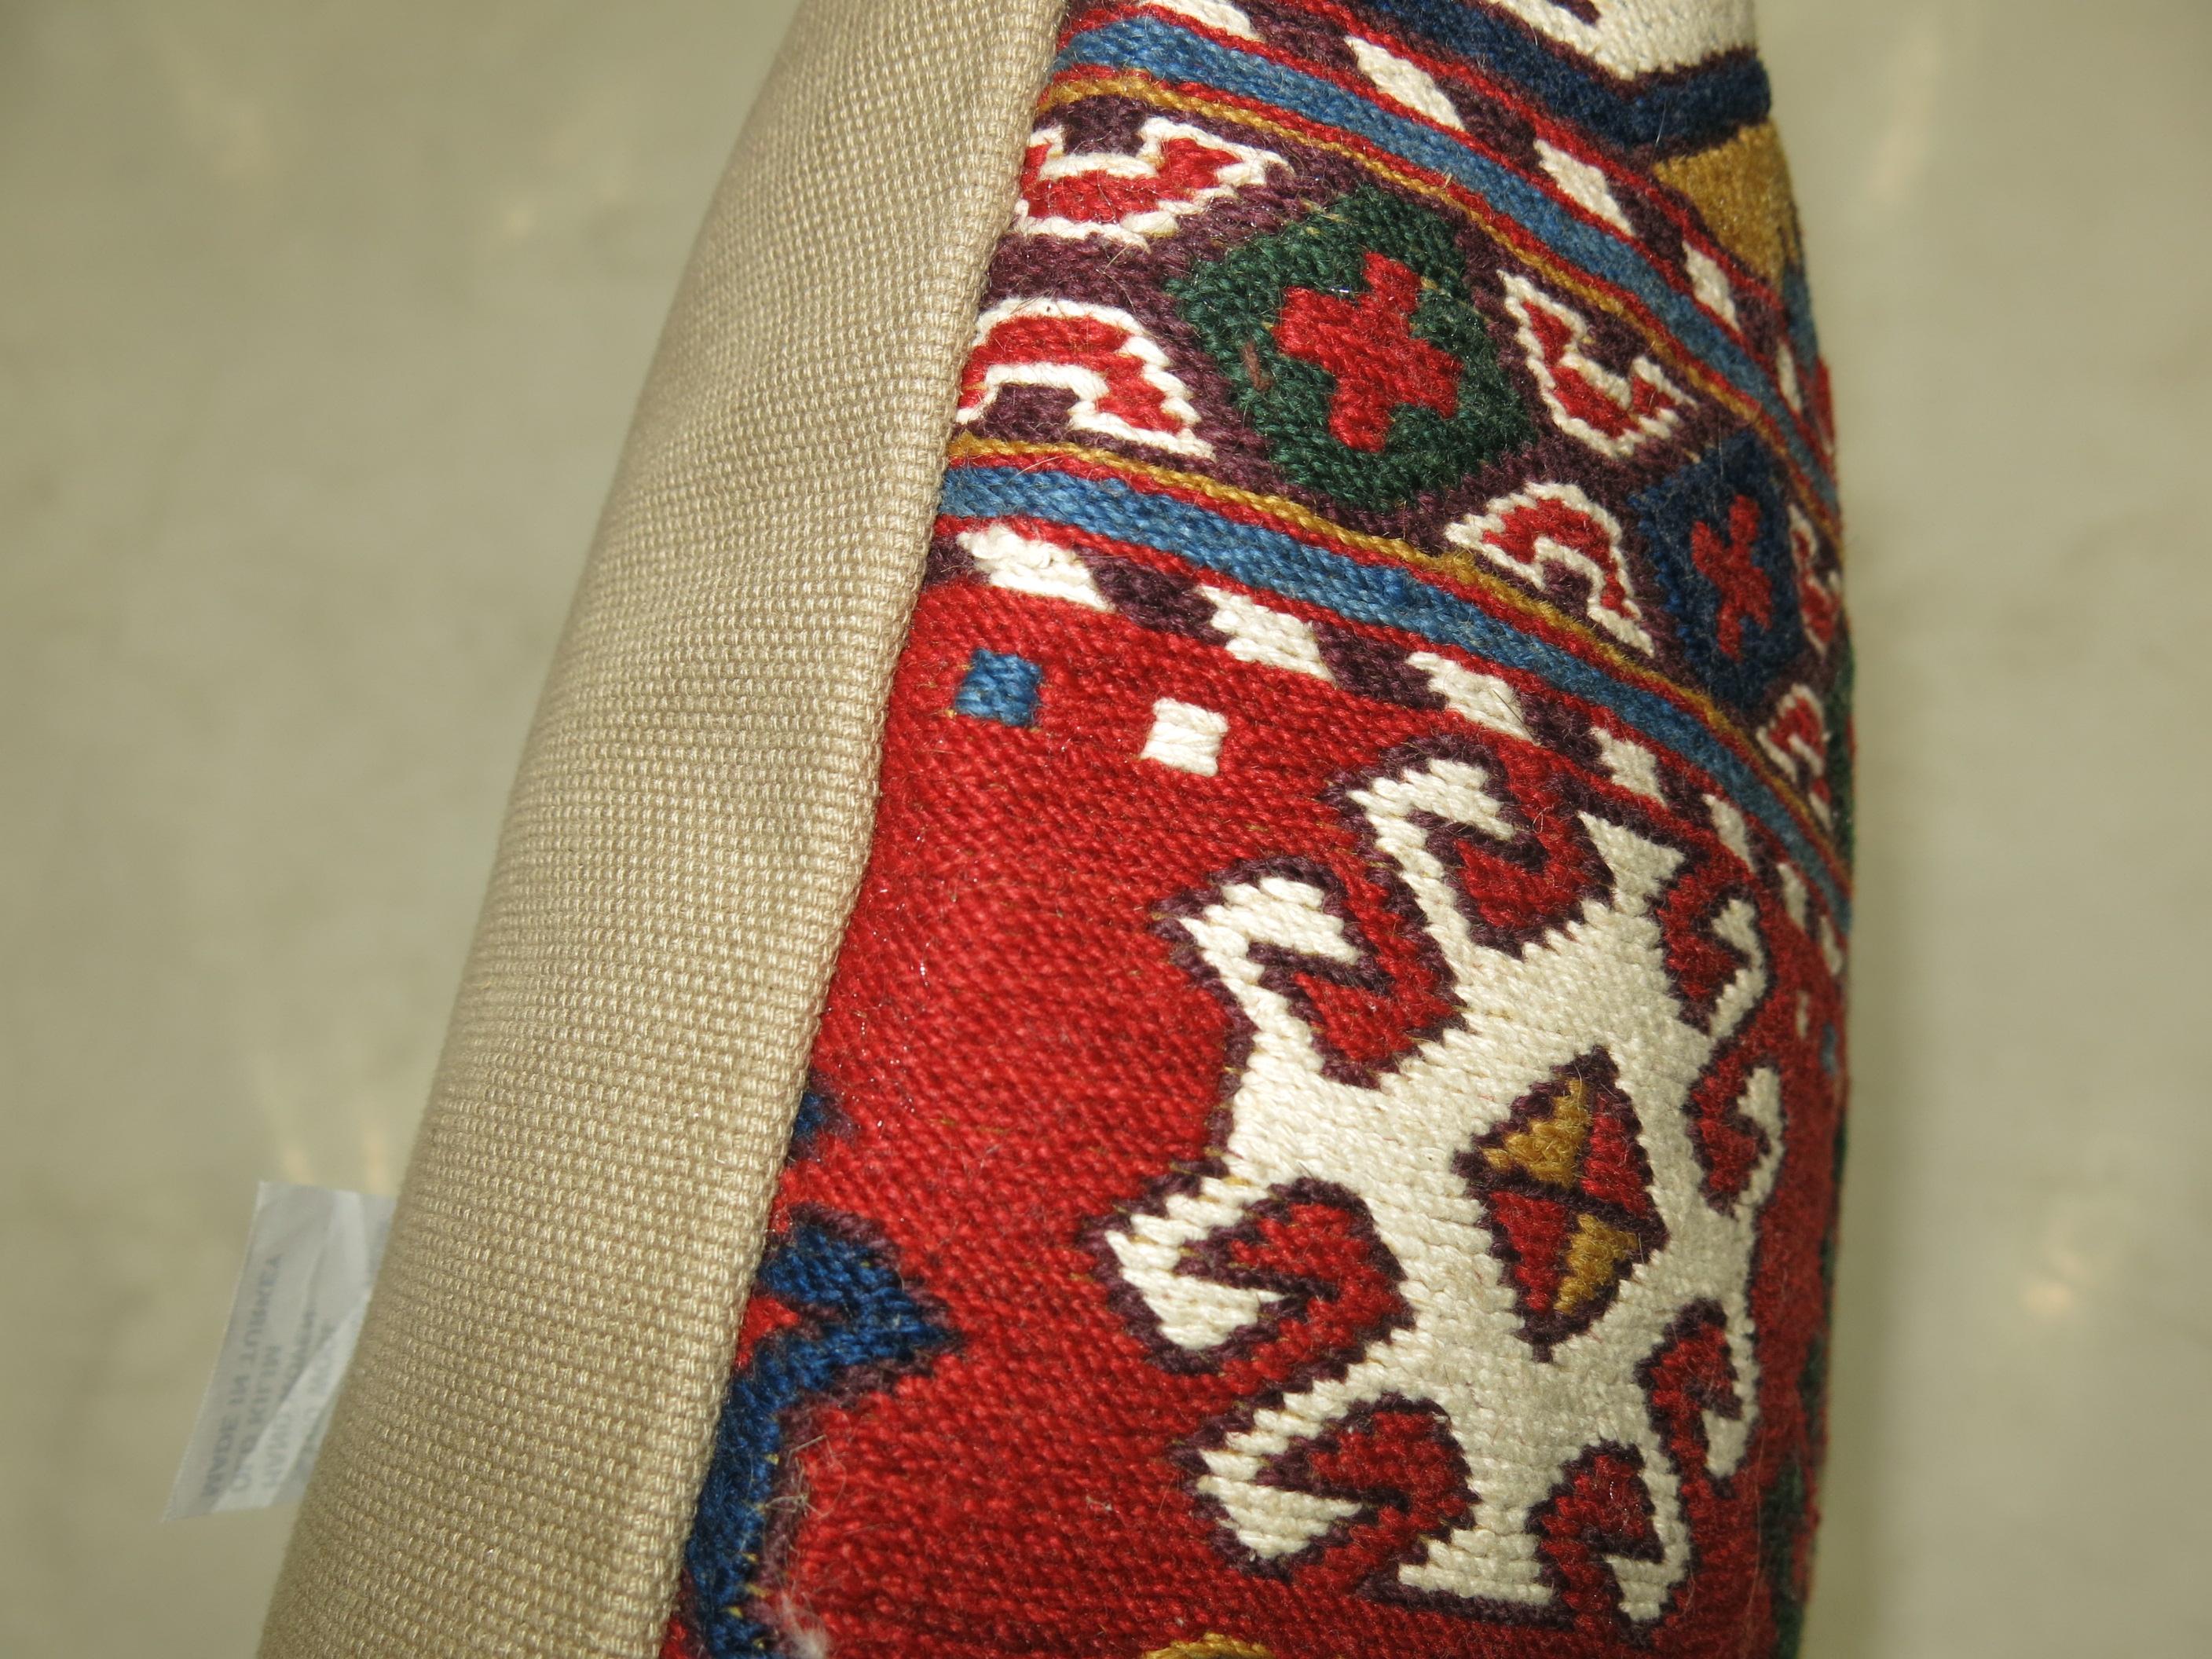 Pillow made from a colorful vintage Persian Kilim flat-weave.

17'' x 17''